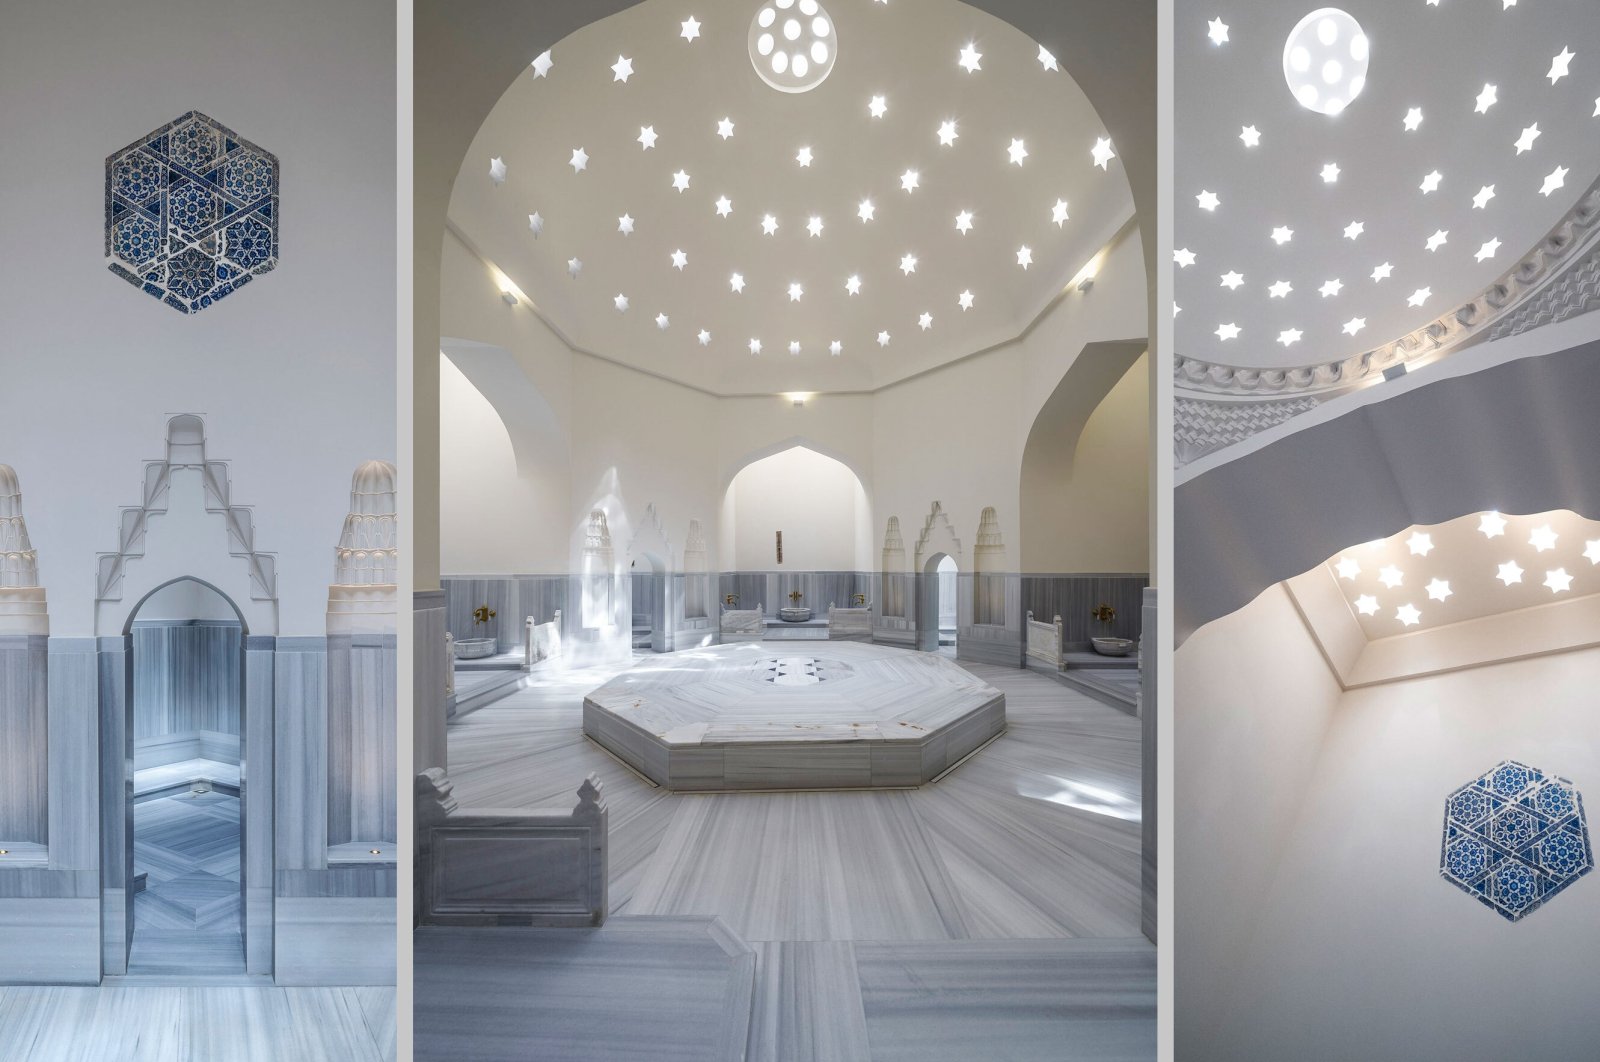 Must See: Giant 16th Century Turkish Baths to Reopen in Istanbul as Part-Museum Part-Antique Spa